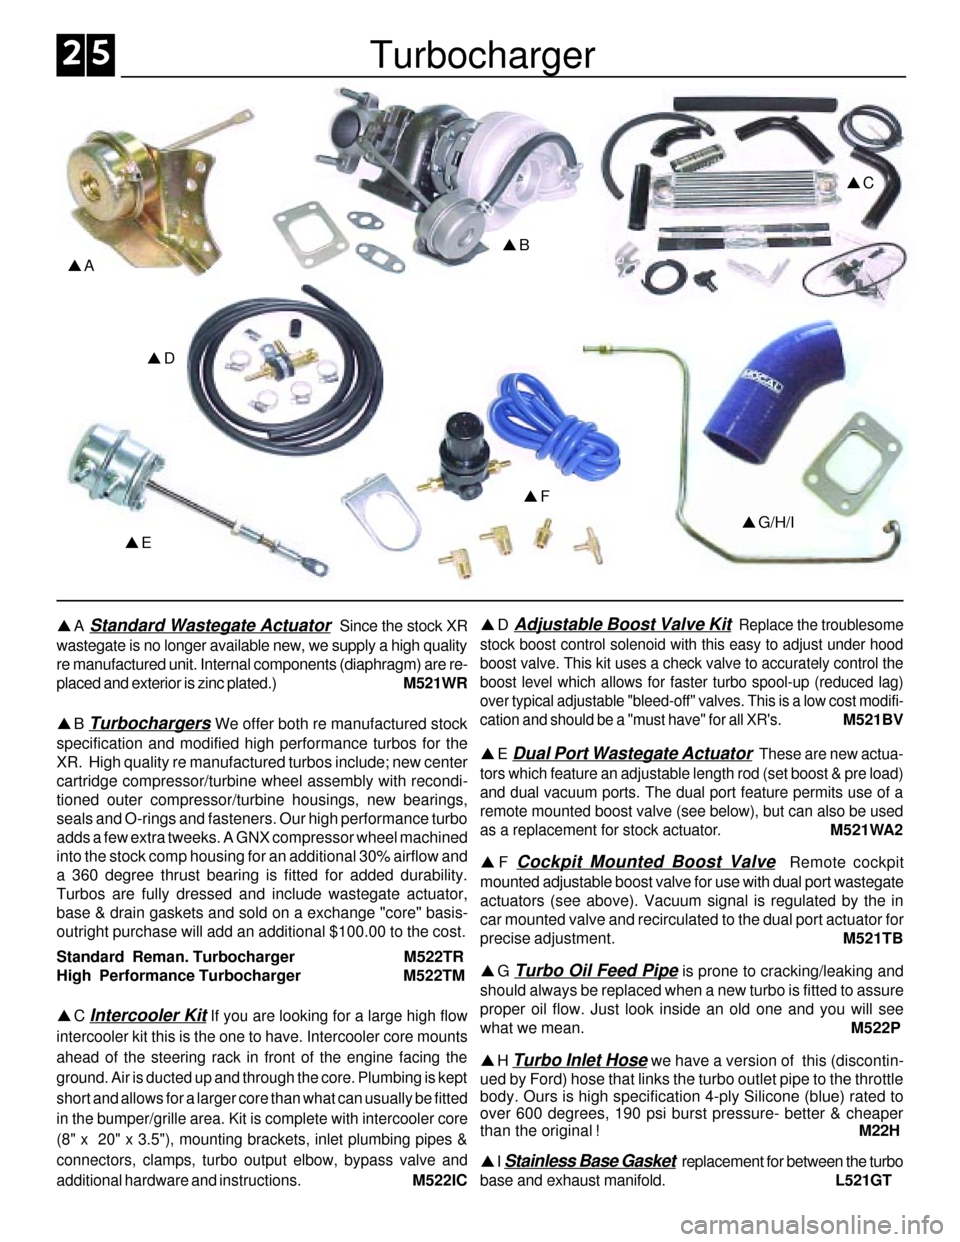 FORD SIERRA 1992 2.G XR4 Workshop Manual Turbocharger
pC
pG/H/I
pF
pD
pA
pB
pE
pA Standard Wastegate Actuator  Since the stock XR
wastegate is no longer available new, we supply a high quality
re manufactured unit. Internal components (diaph